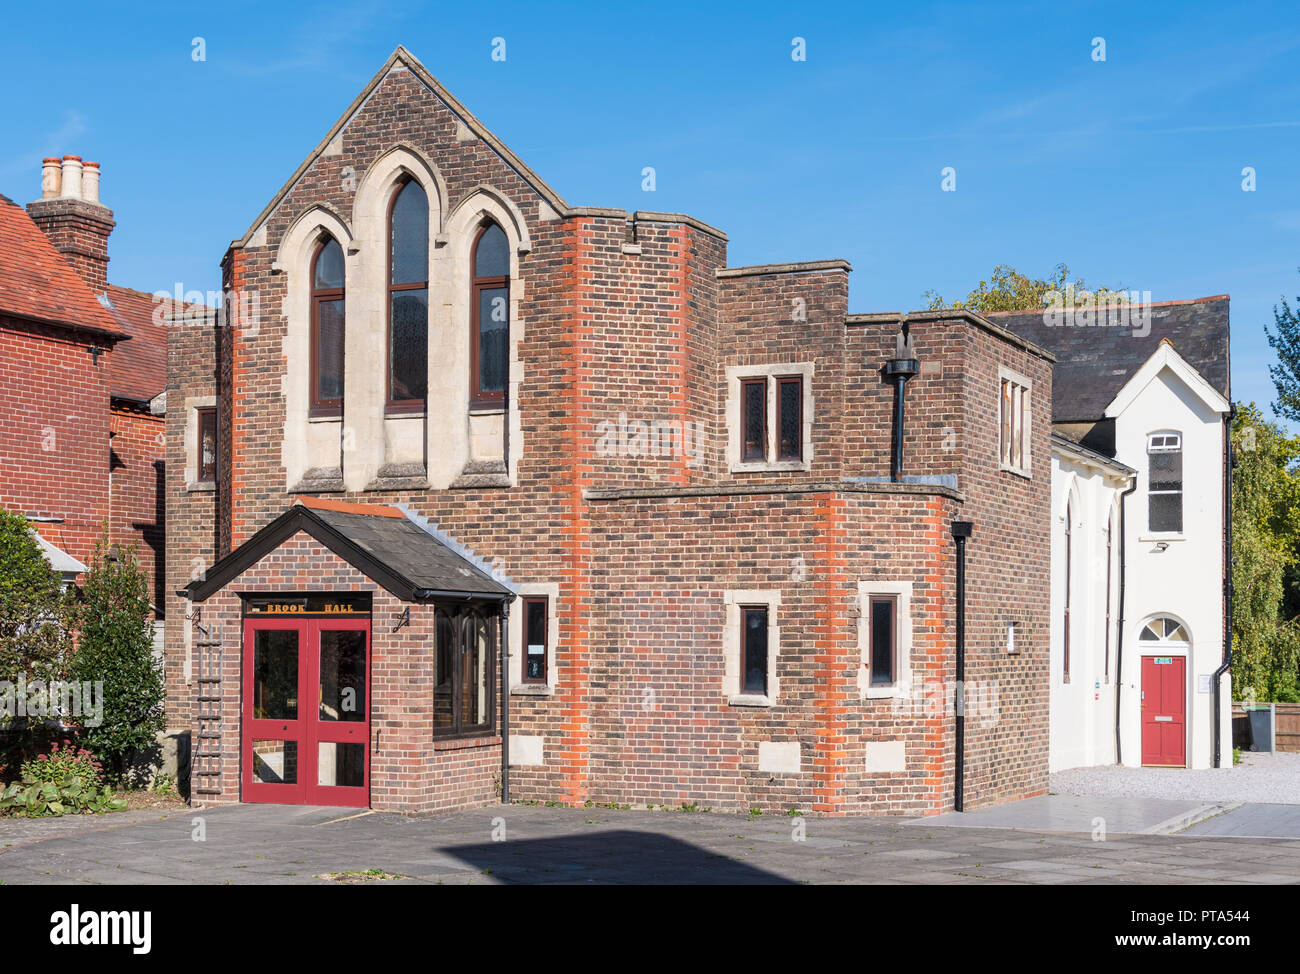 Front of Brook Hall building that used to be the old Baptist Church in Emsworth, Hampshire, England, UK. Stock Photo